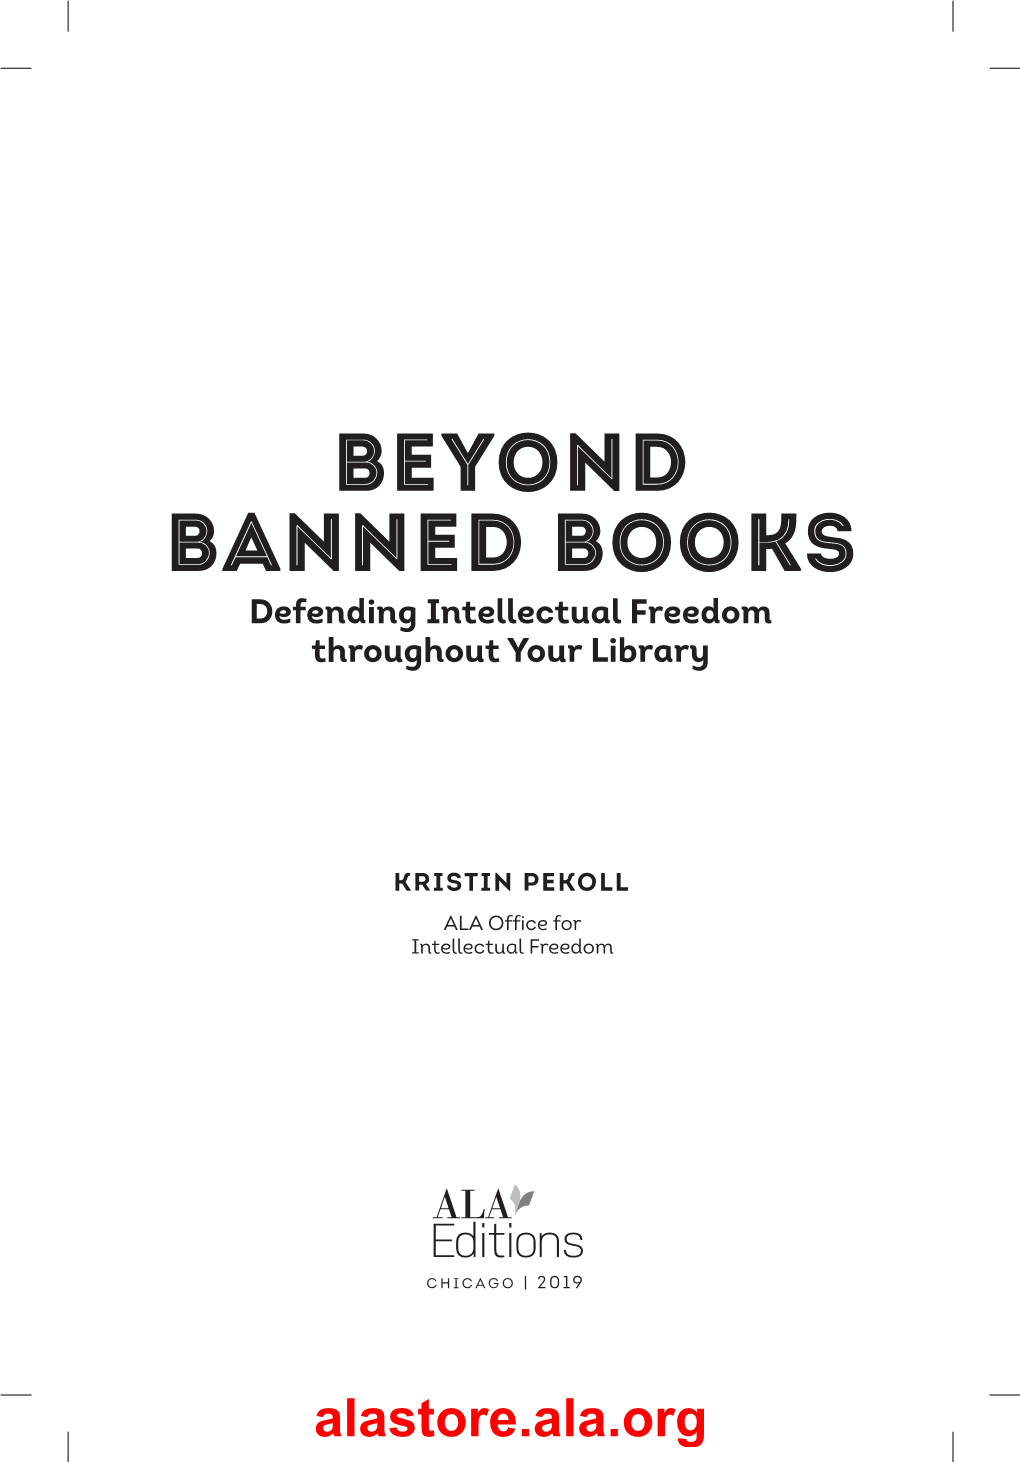 BEYOND BANNED BOOKS Defending Intellectual Freedom Throughout Your Library